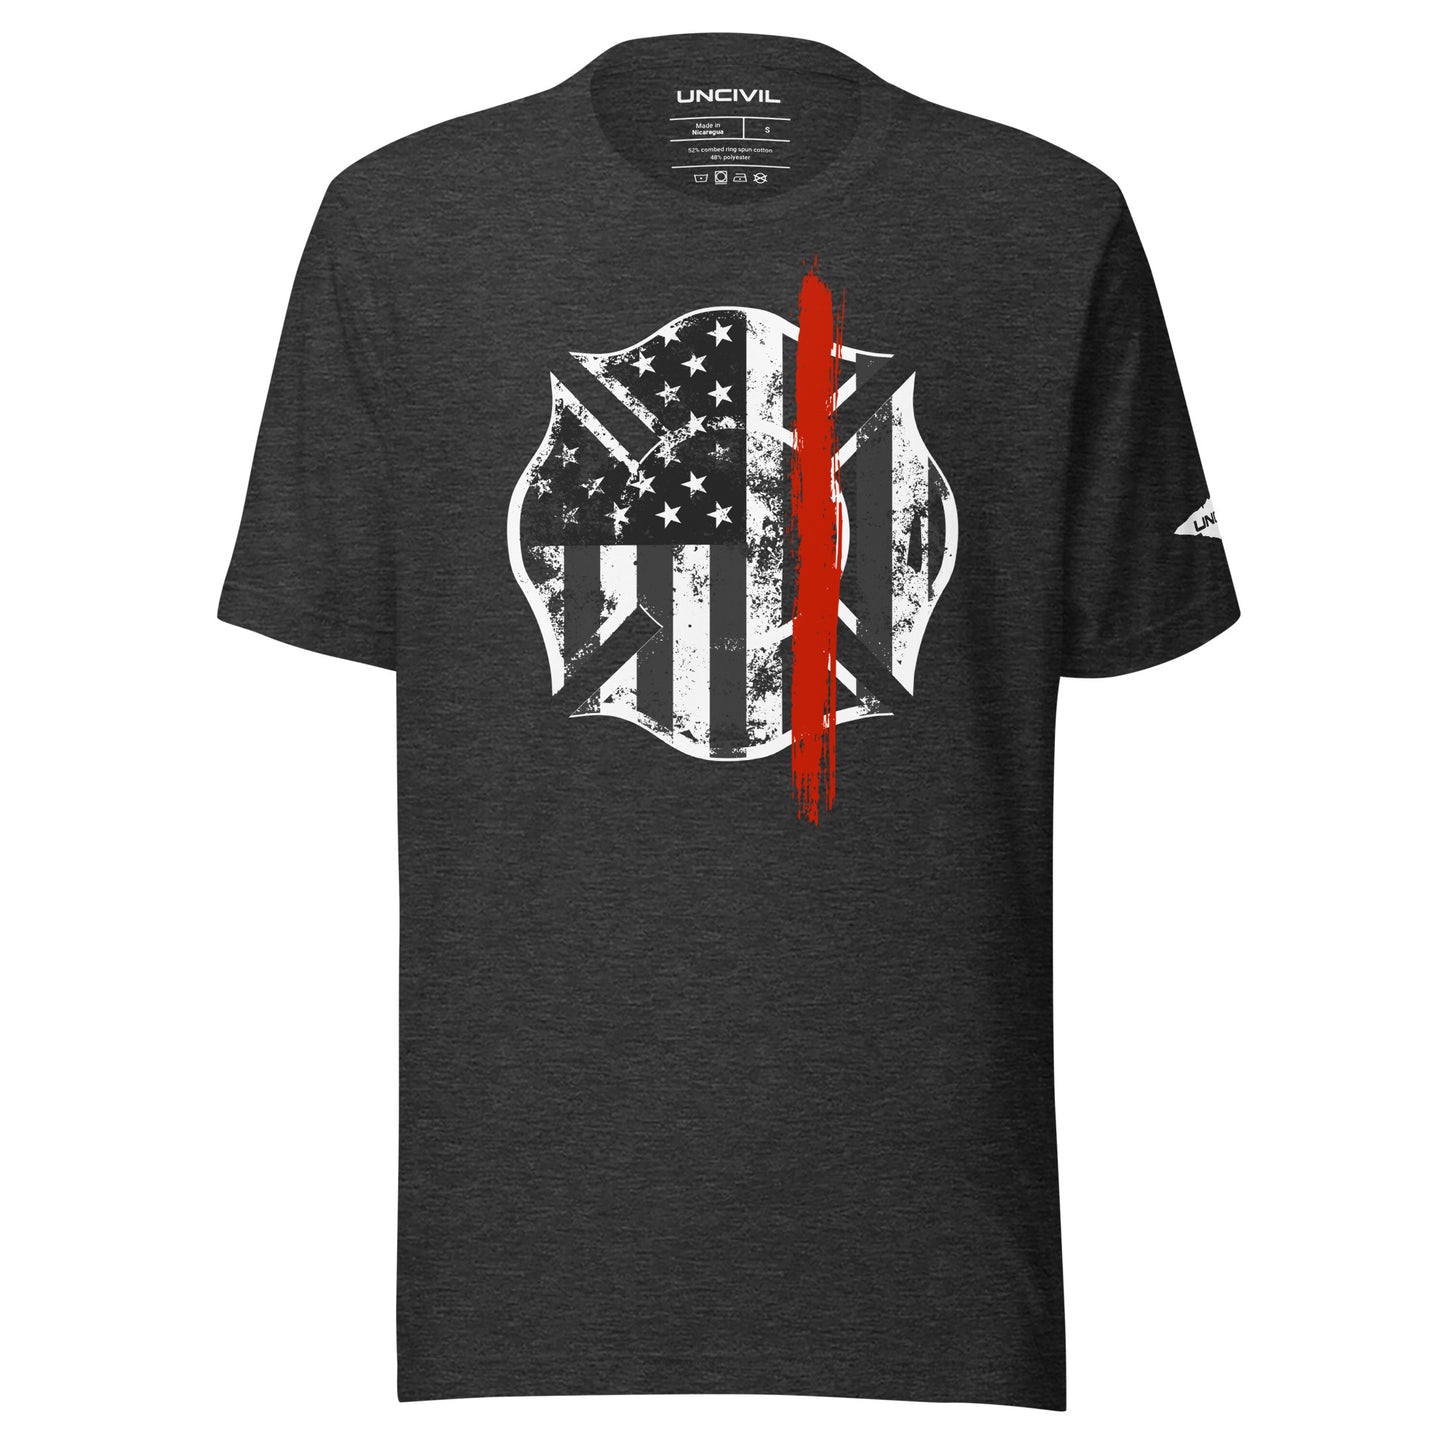 Back the Red t-shirt. Firefighter Thin Red Line shirt in dark heather grey.